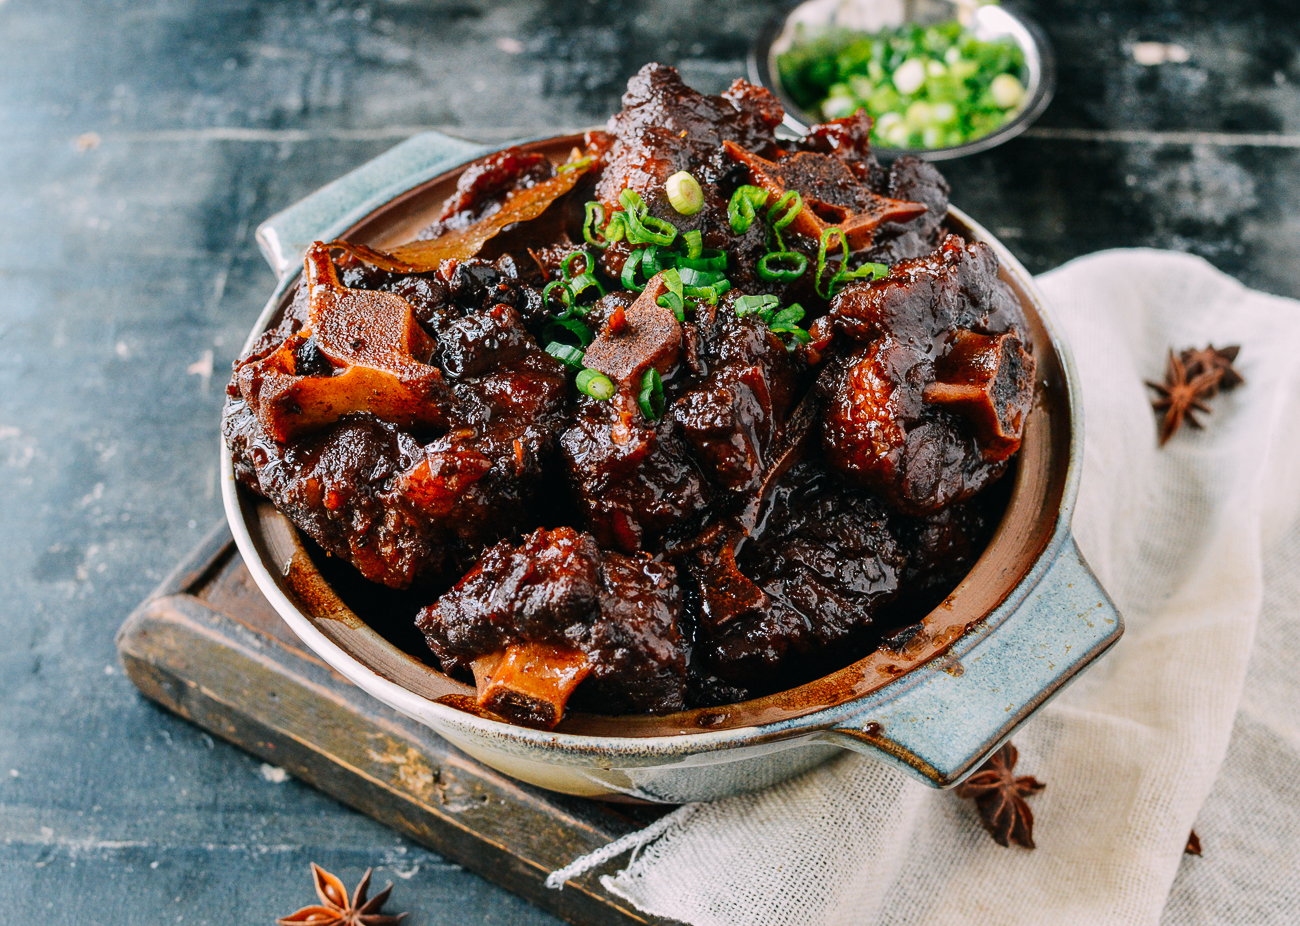 Chinese Braised Oxtails